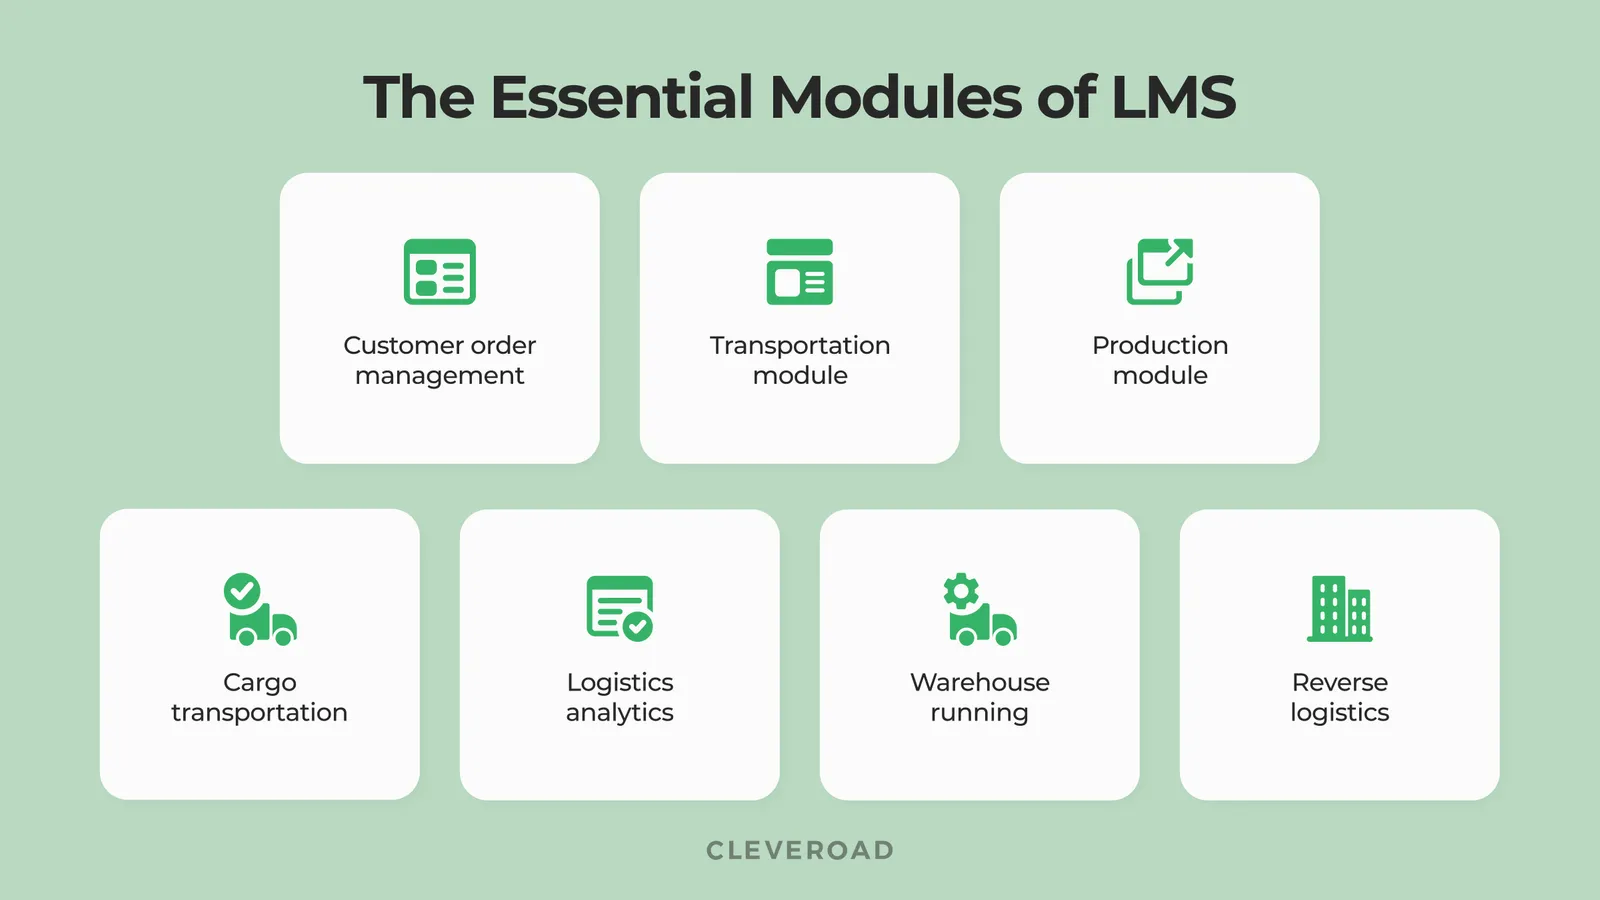 The essential modules of logistics management system